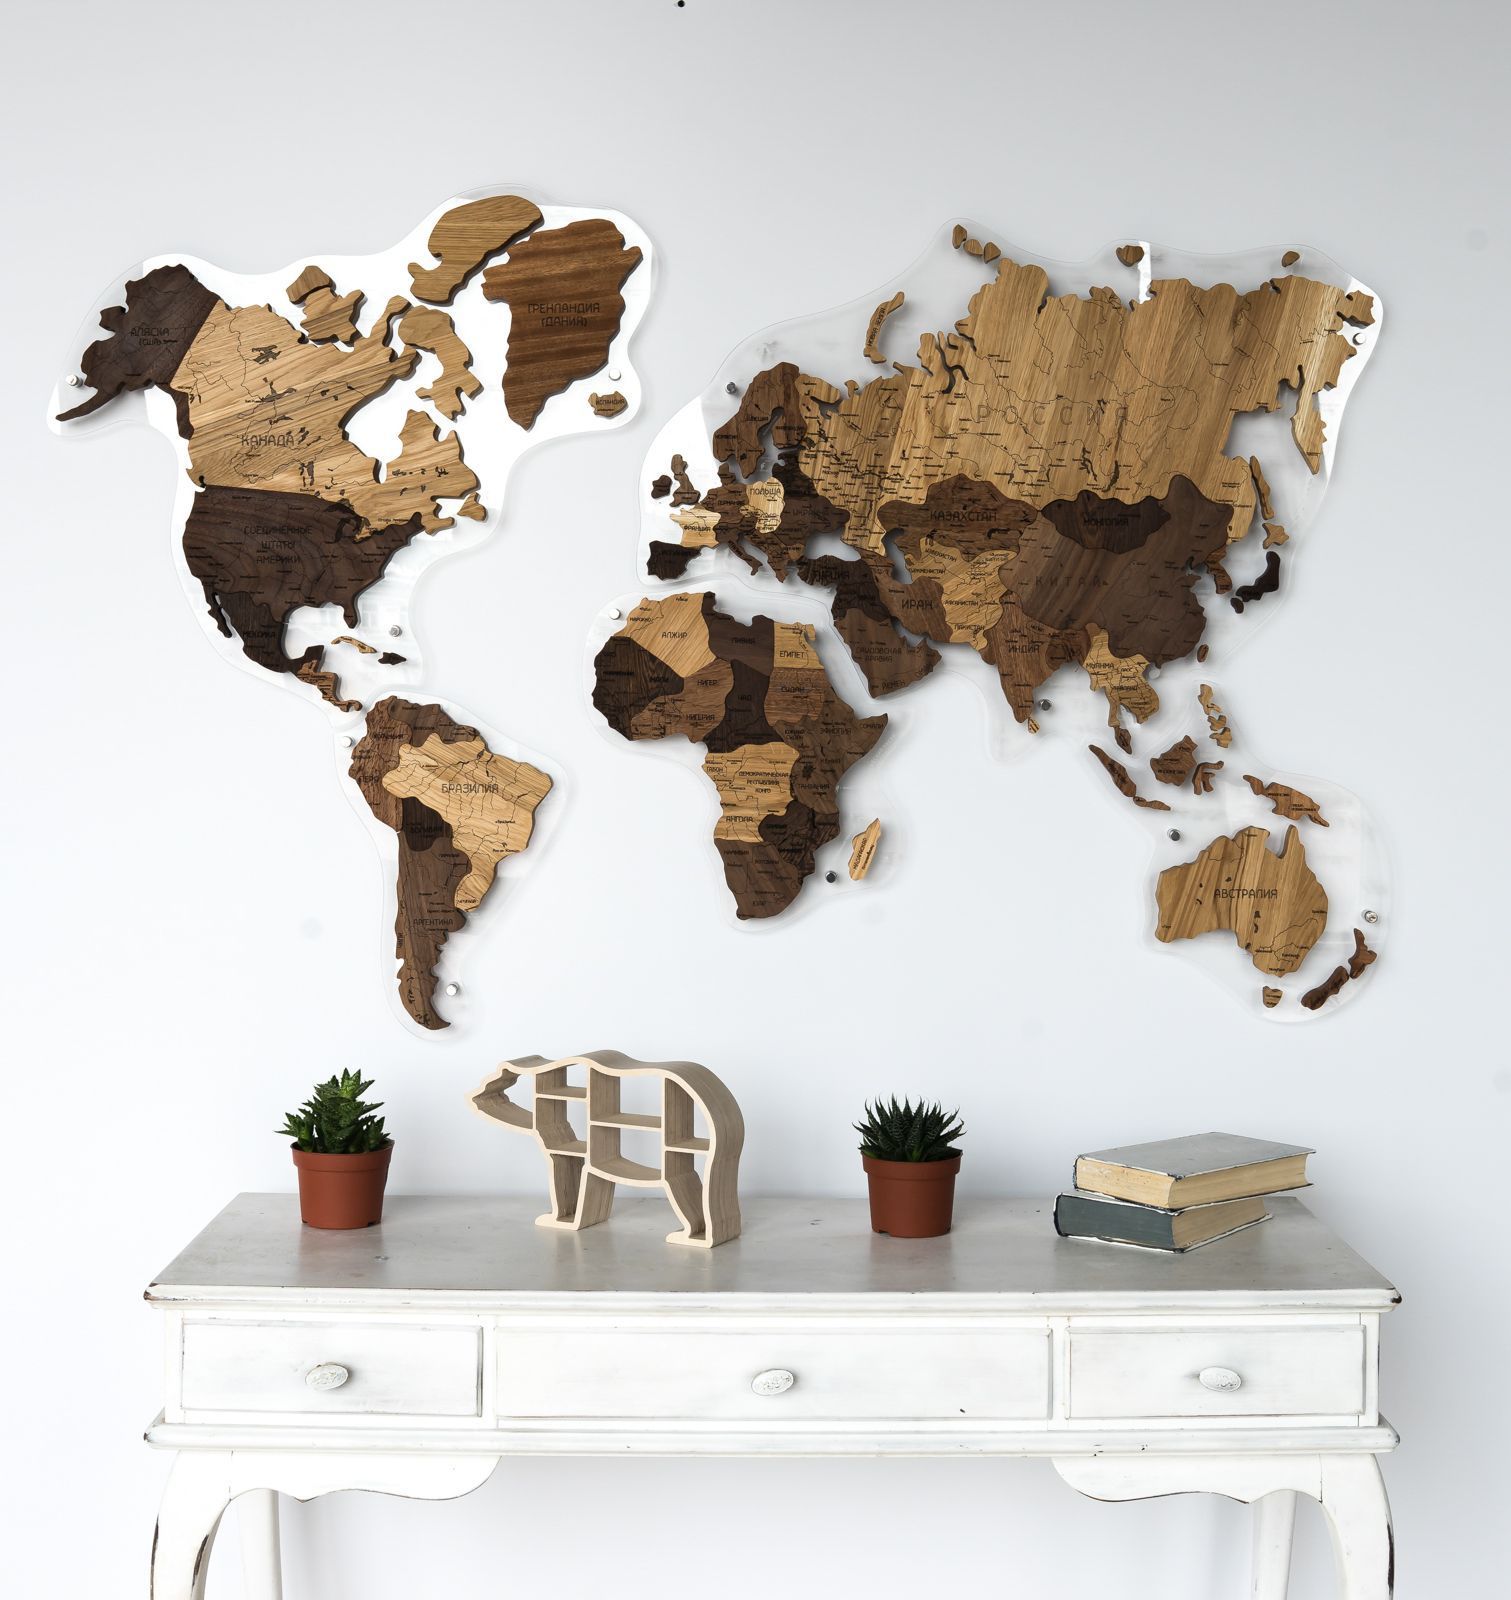 Wooden World Map For Wall Decorgadenmap | Wall Decor, Globe Decor With Regard To Globe Wall Art (View 3 of 15)